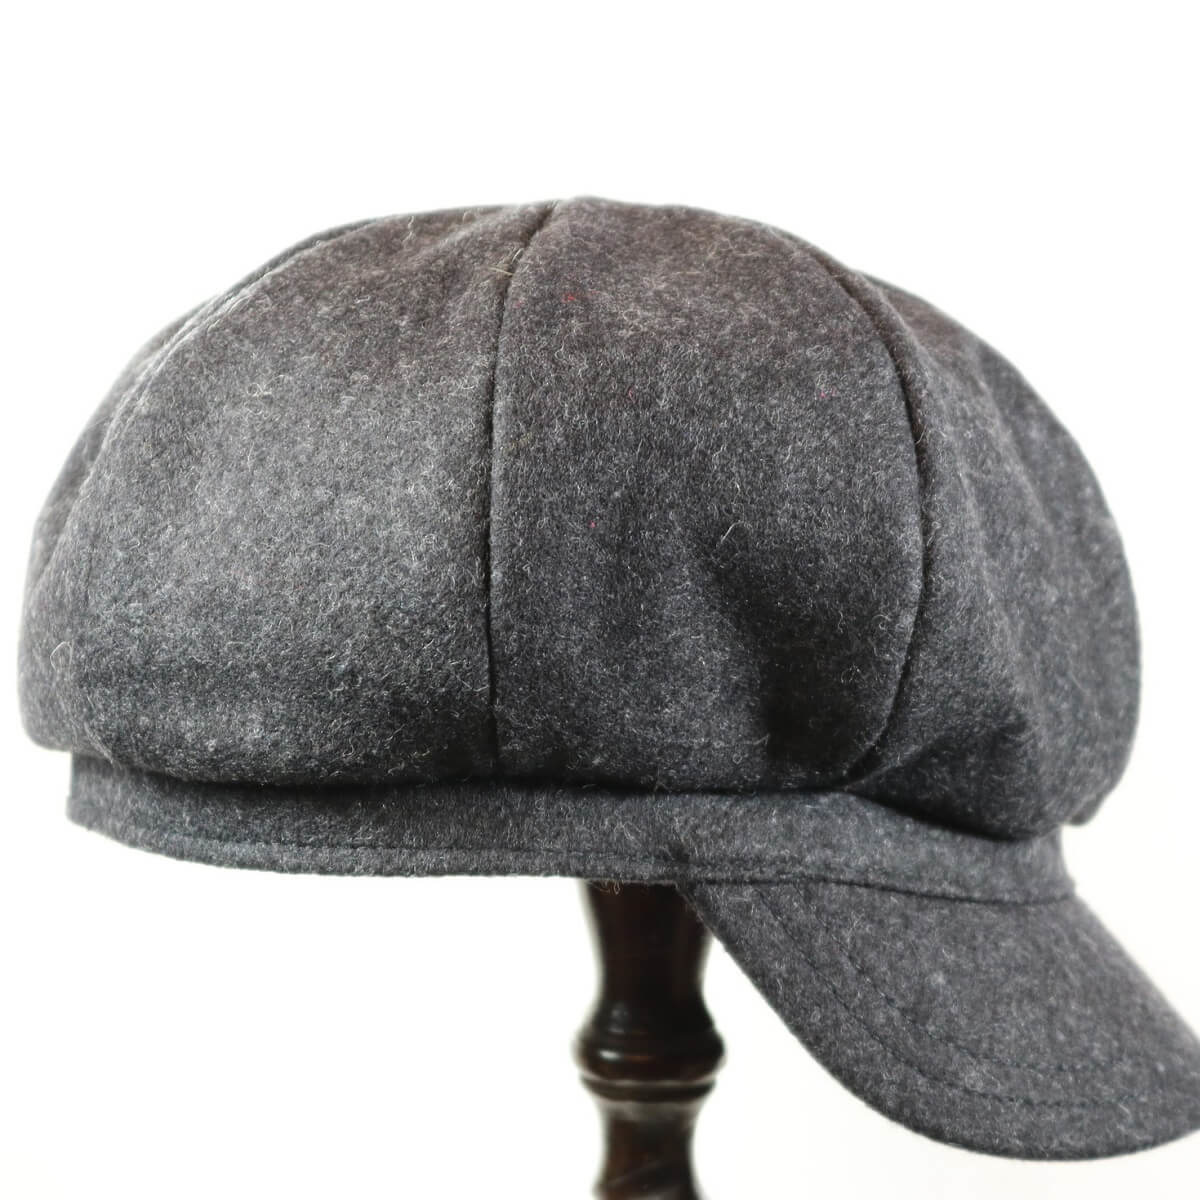 Find a Winter Cap That Holds Up to the Elements